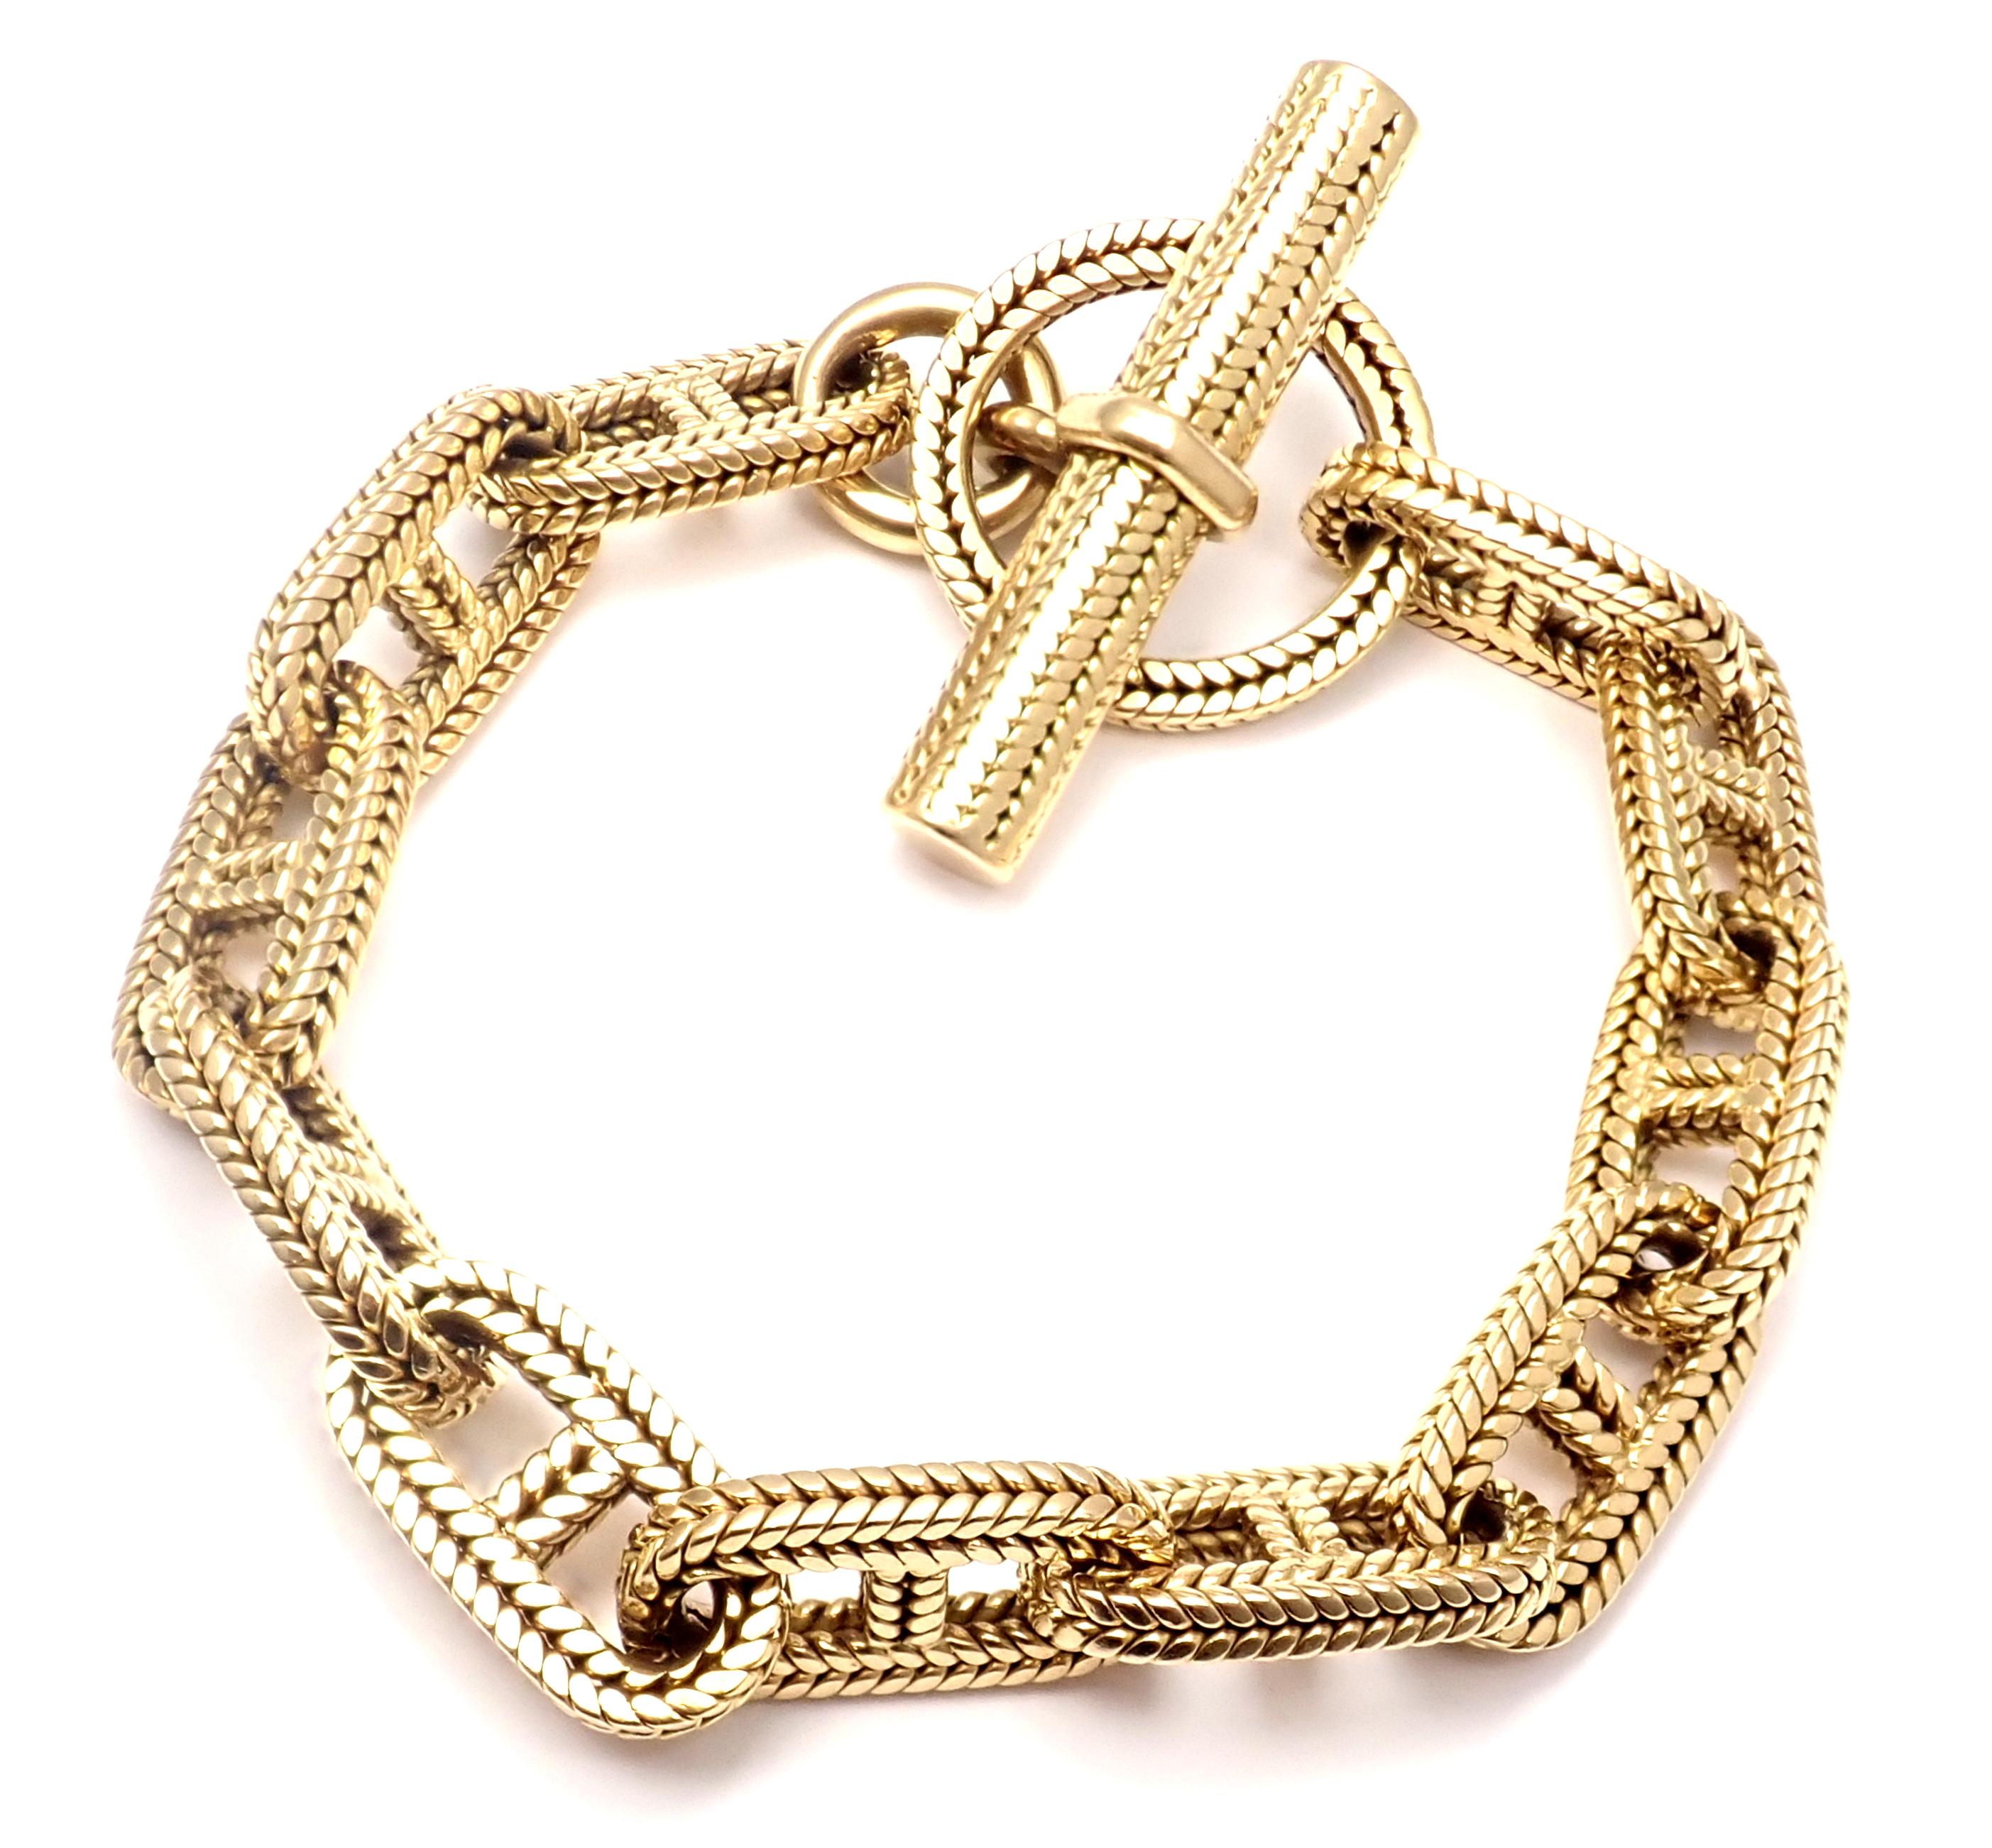 18k Yellow Gold George L'Enfant Chaine d'Ancr Link Toggle Bracelet by Hermes.
This bracelet is Circa 1960's
Details:
Weight: 85.4 grams
Length: 8